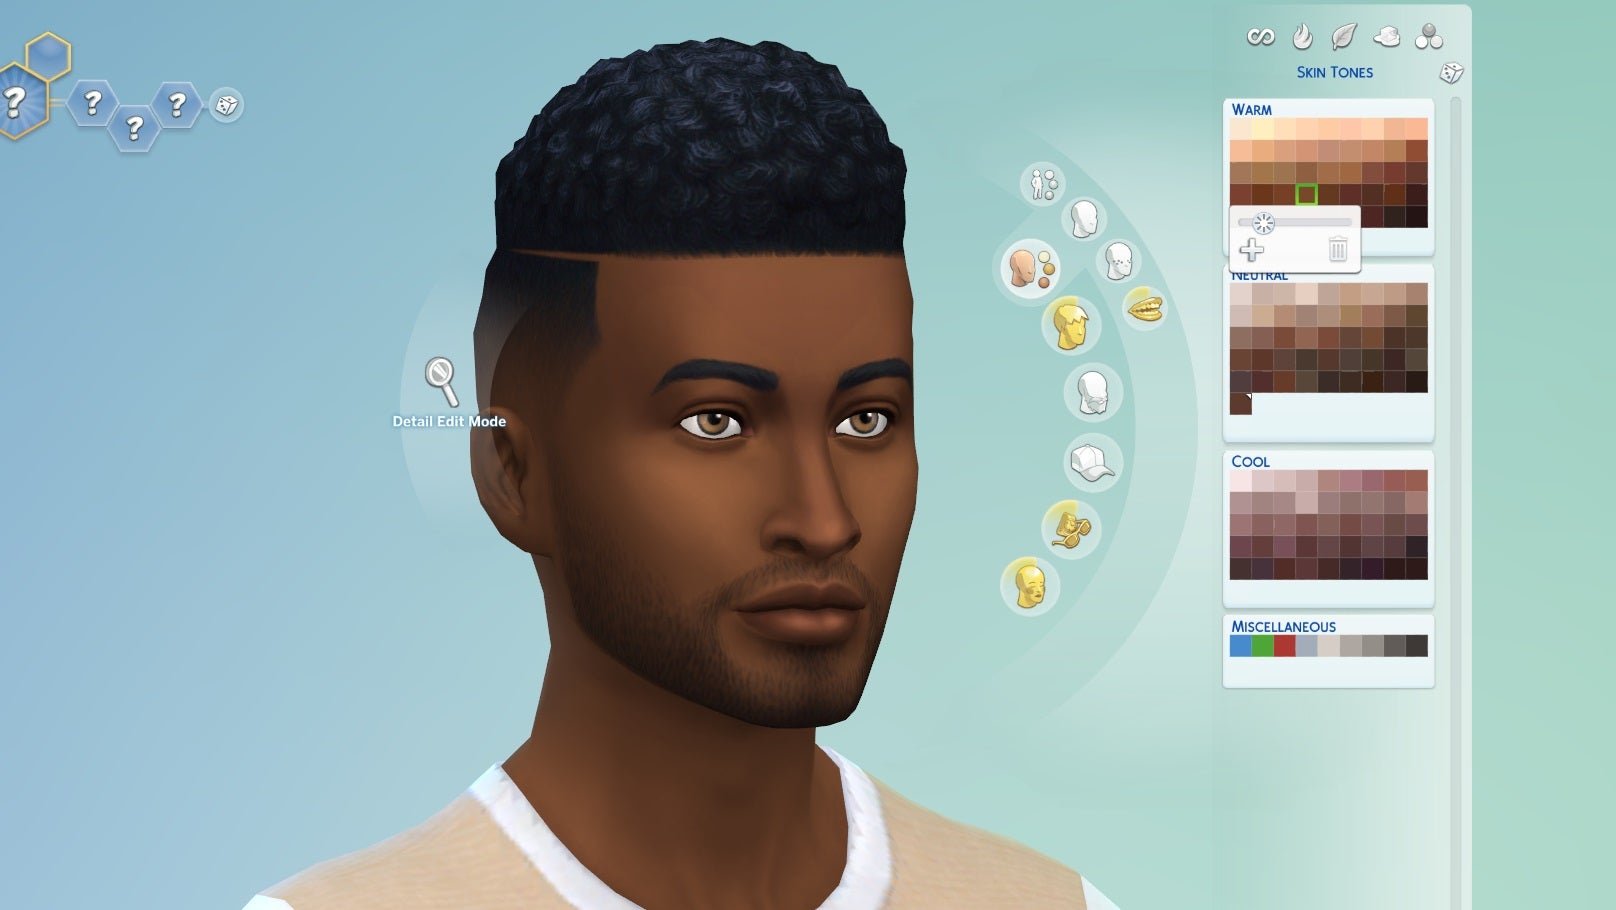 Image for The Sims 4 new update adds over 100 skin tones and sliders to character creation